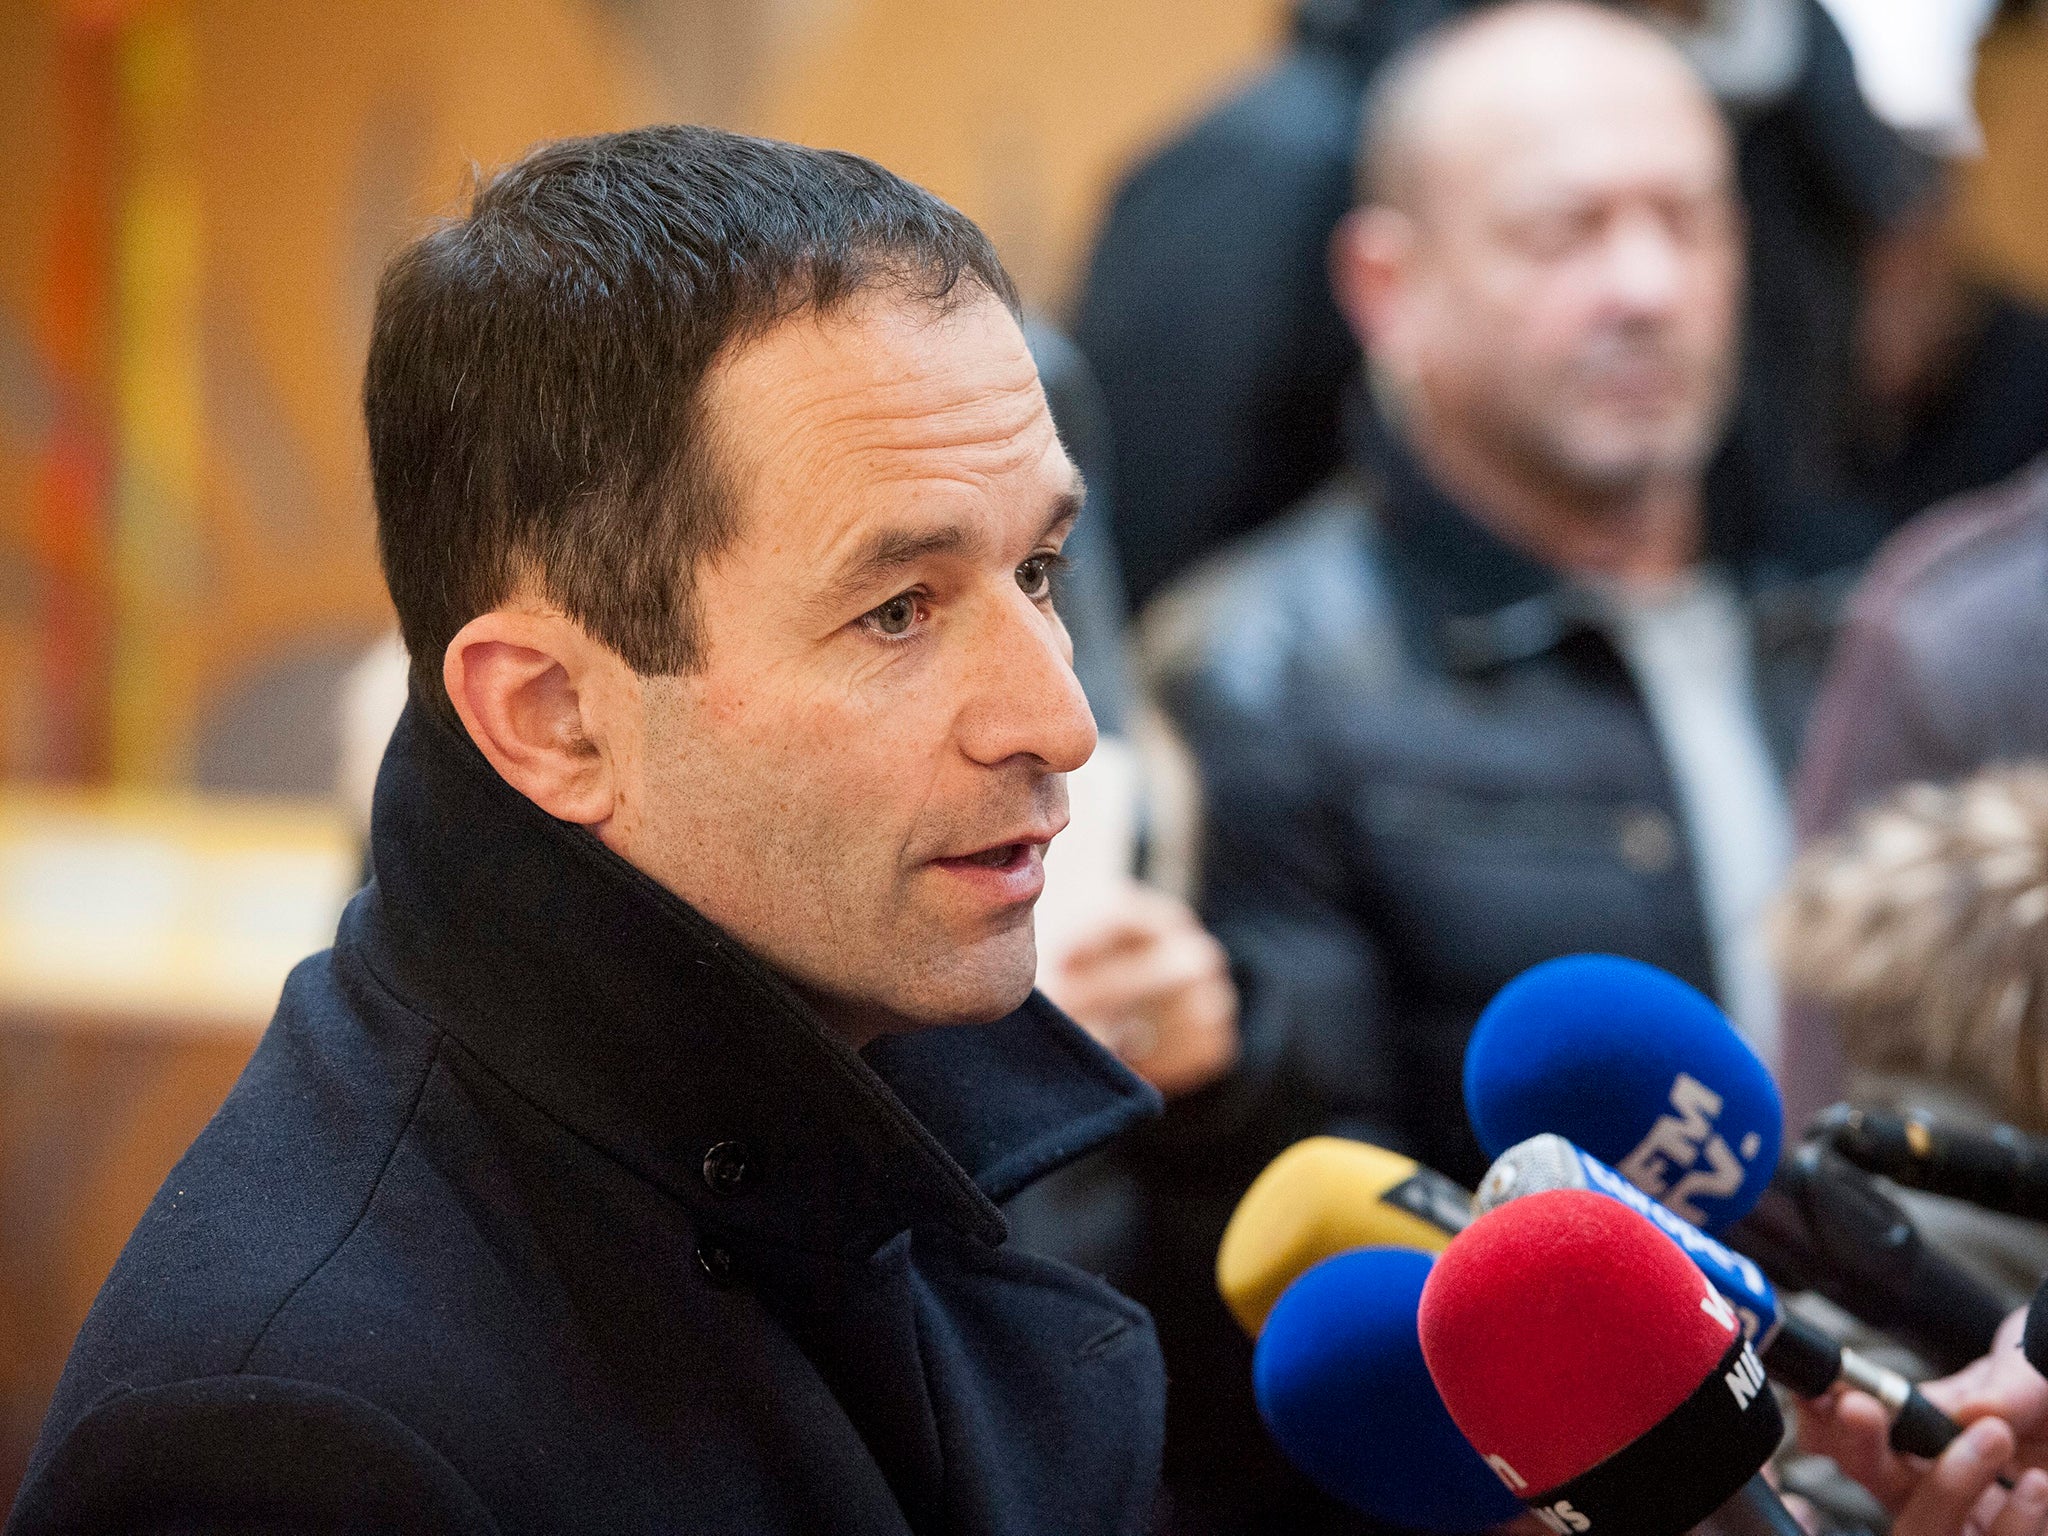 Former education minister Benoit Hamon has won the presidential nomination for France's Socialists